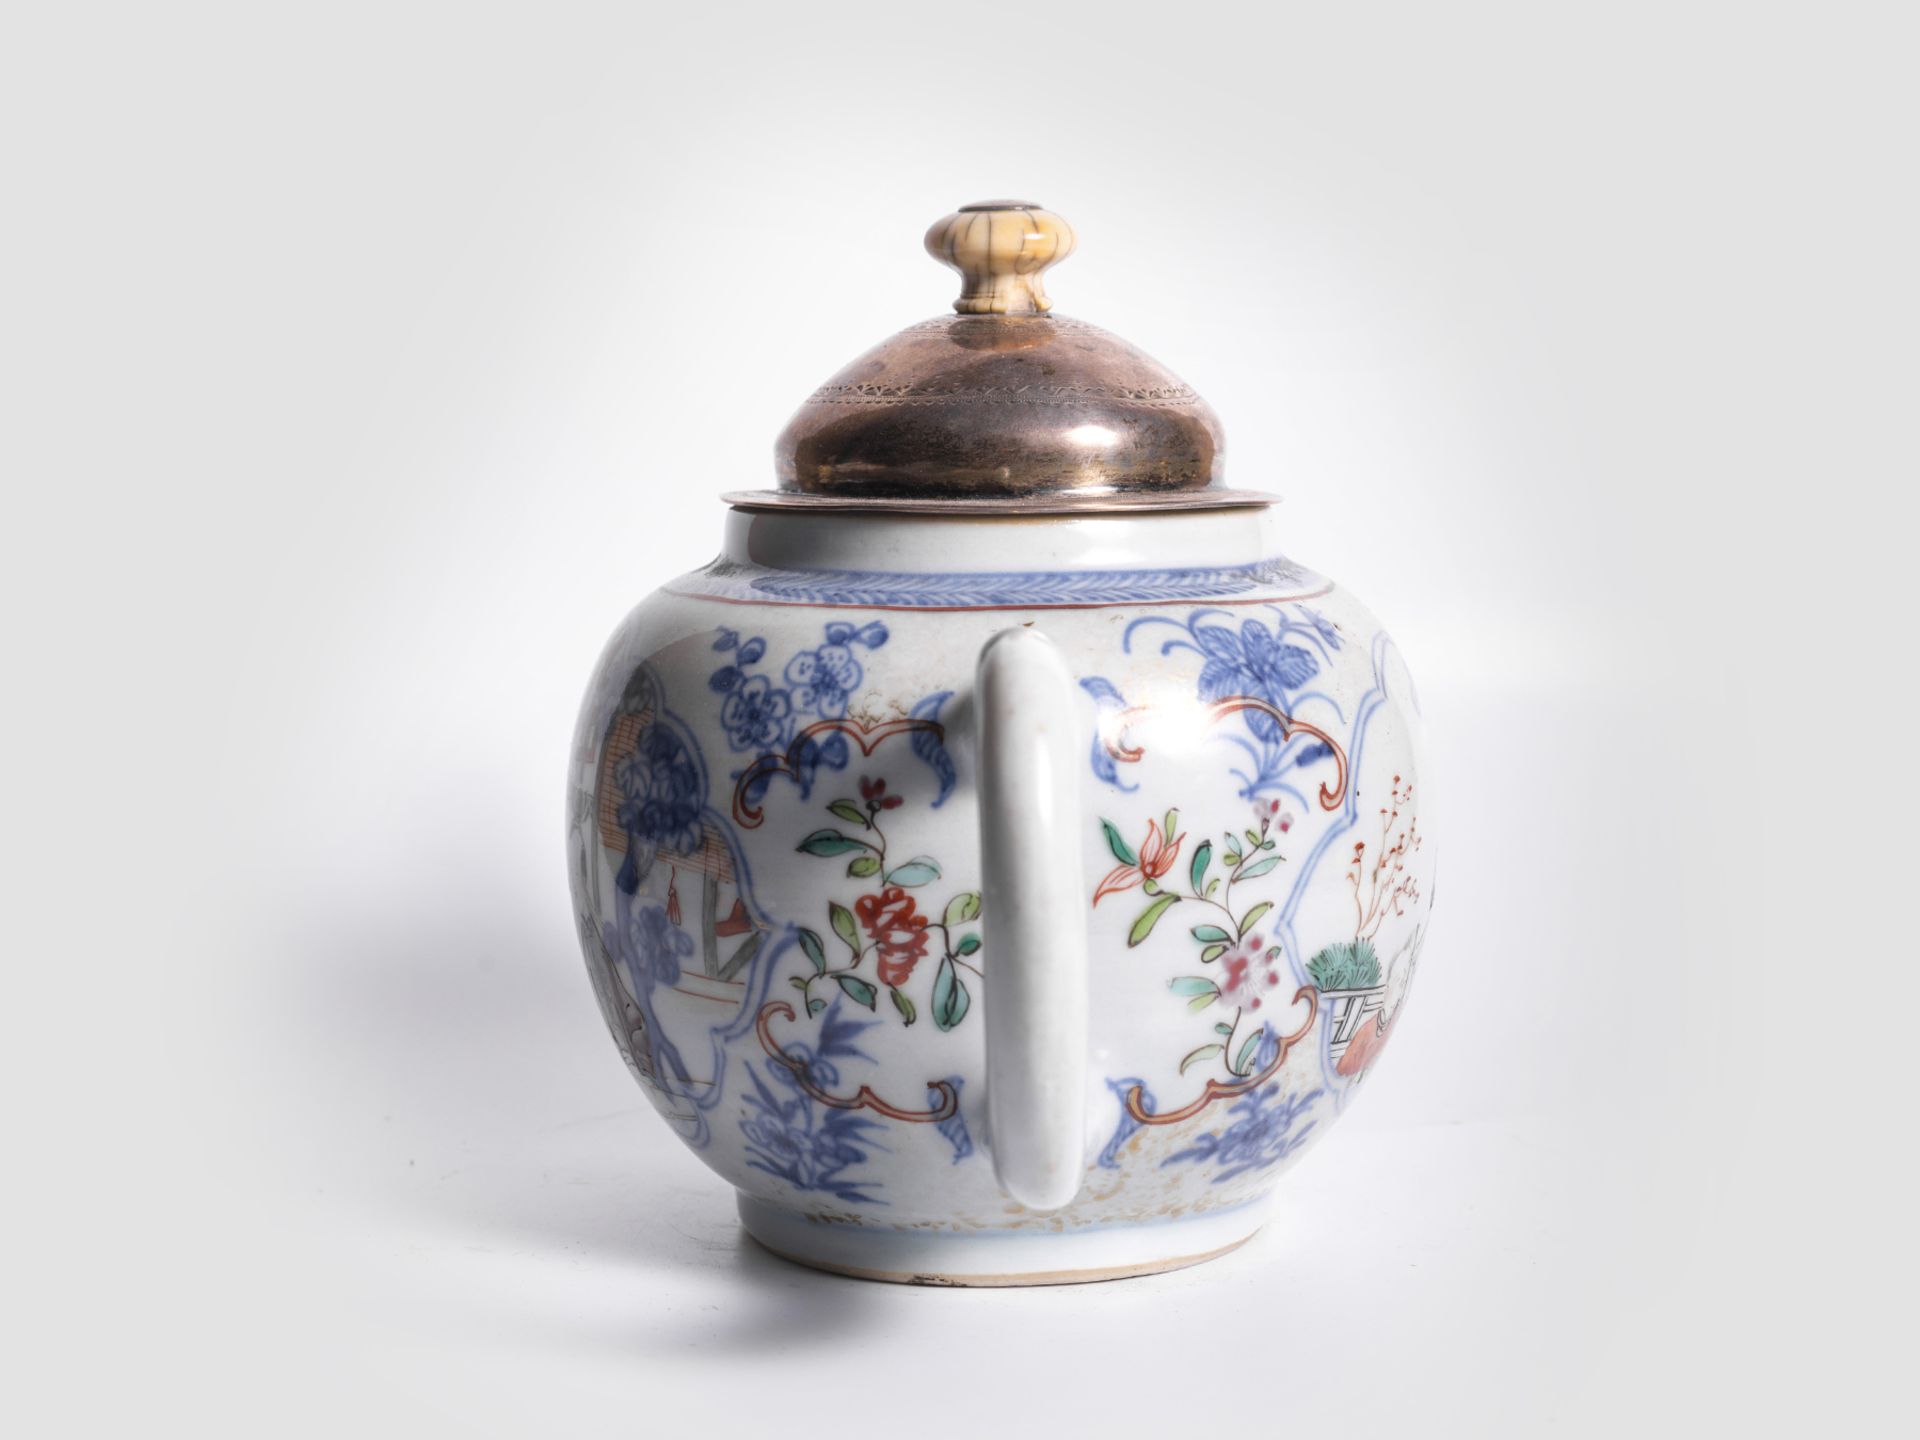 Teapot, China, Quing dynasty - Image 3 of 6